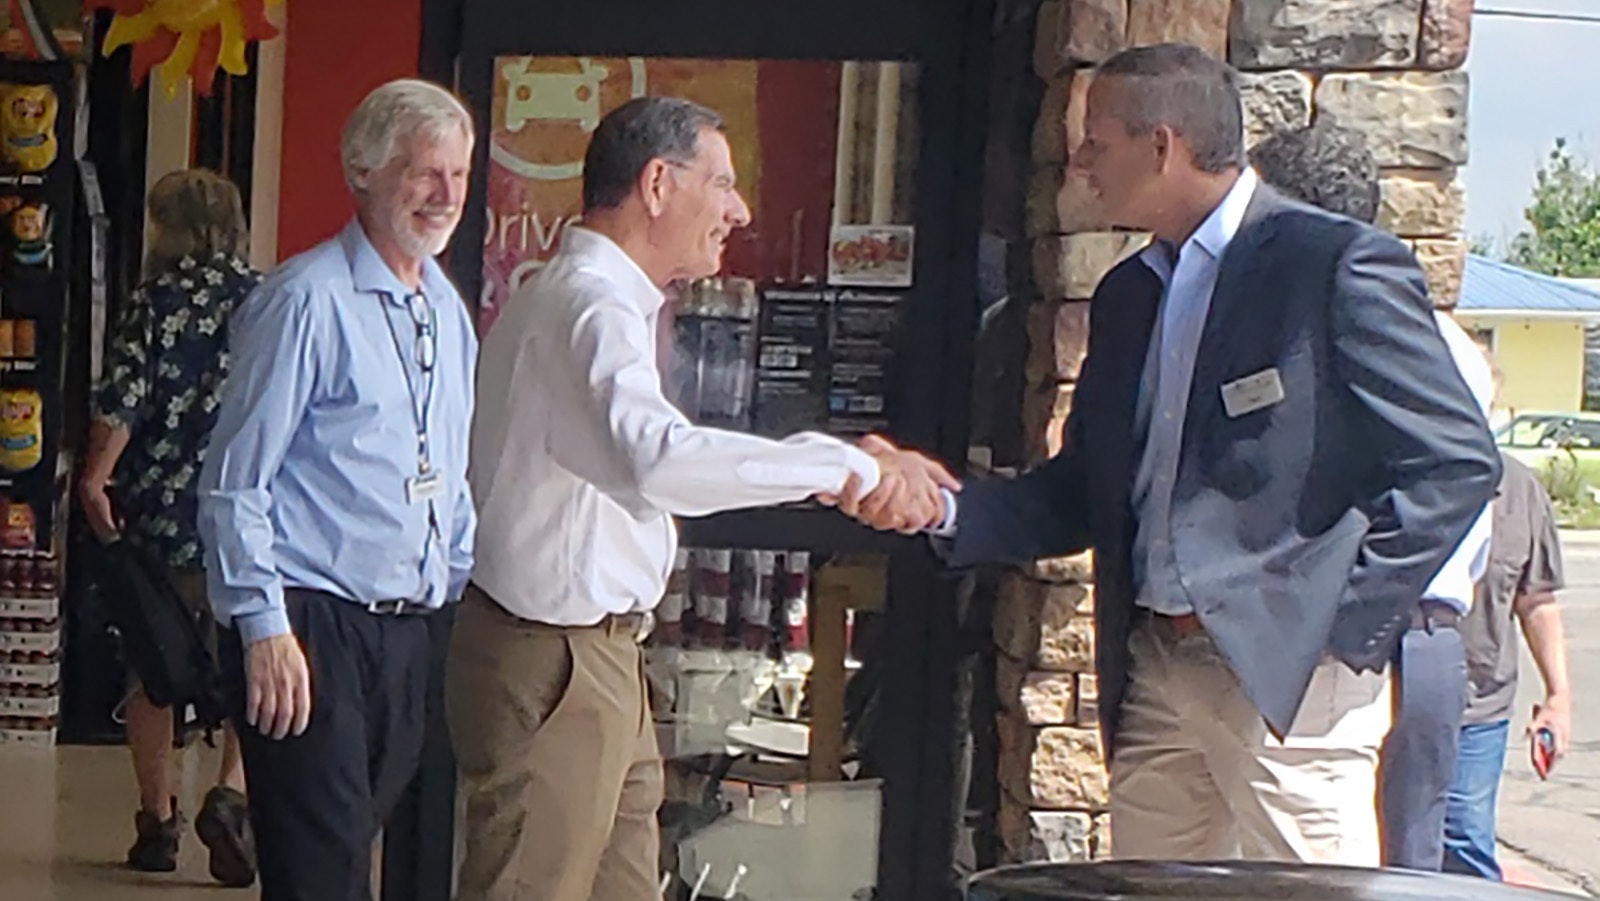 U.S. Sen. John Barrasso, R-Wyoming, shakes hands with Todd Broderick, president of Albertsons Denver Division, outside an Albertsons store in Casper on Tuesday.